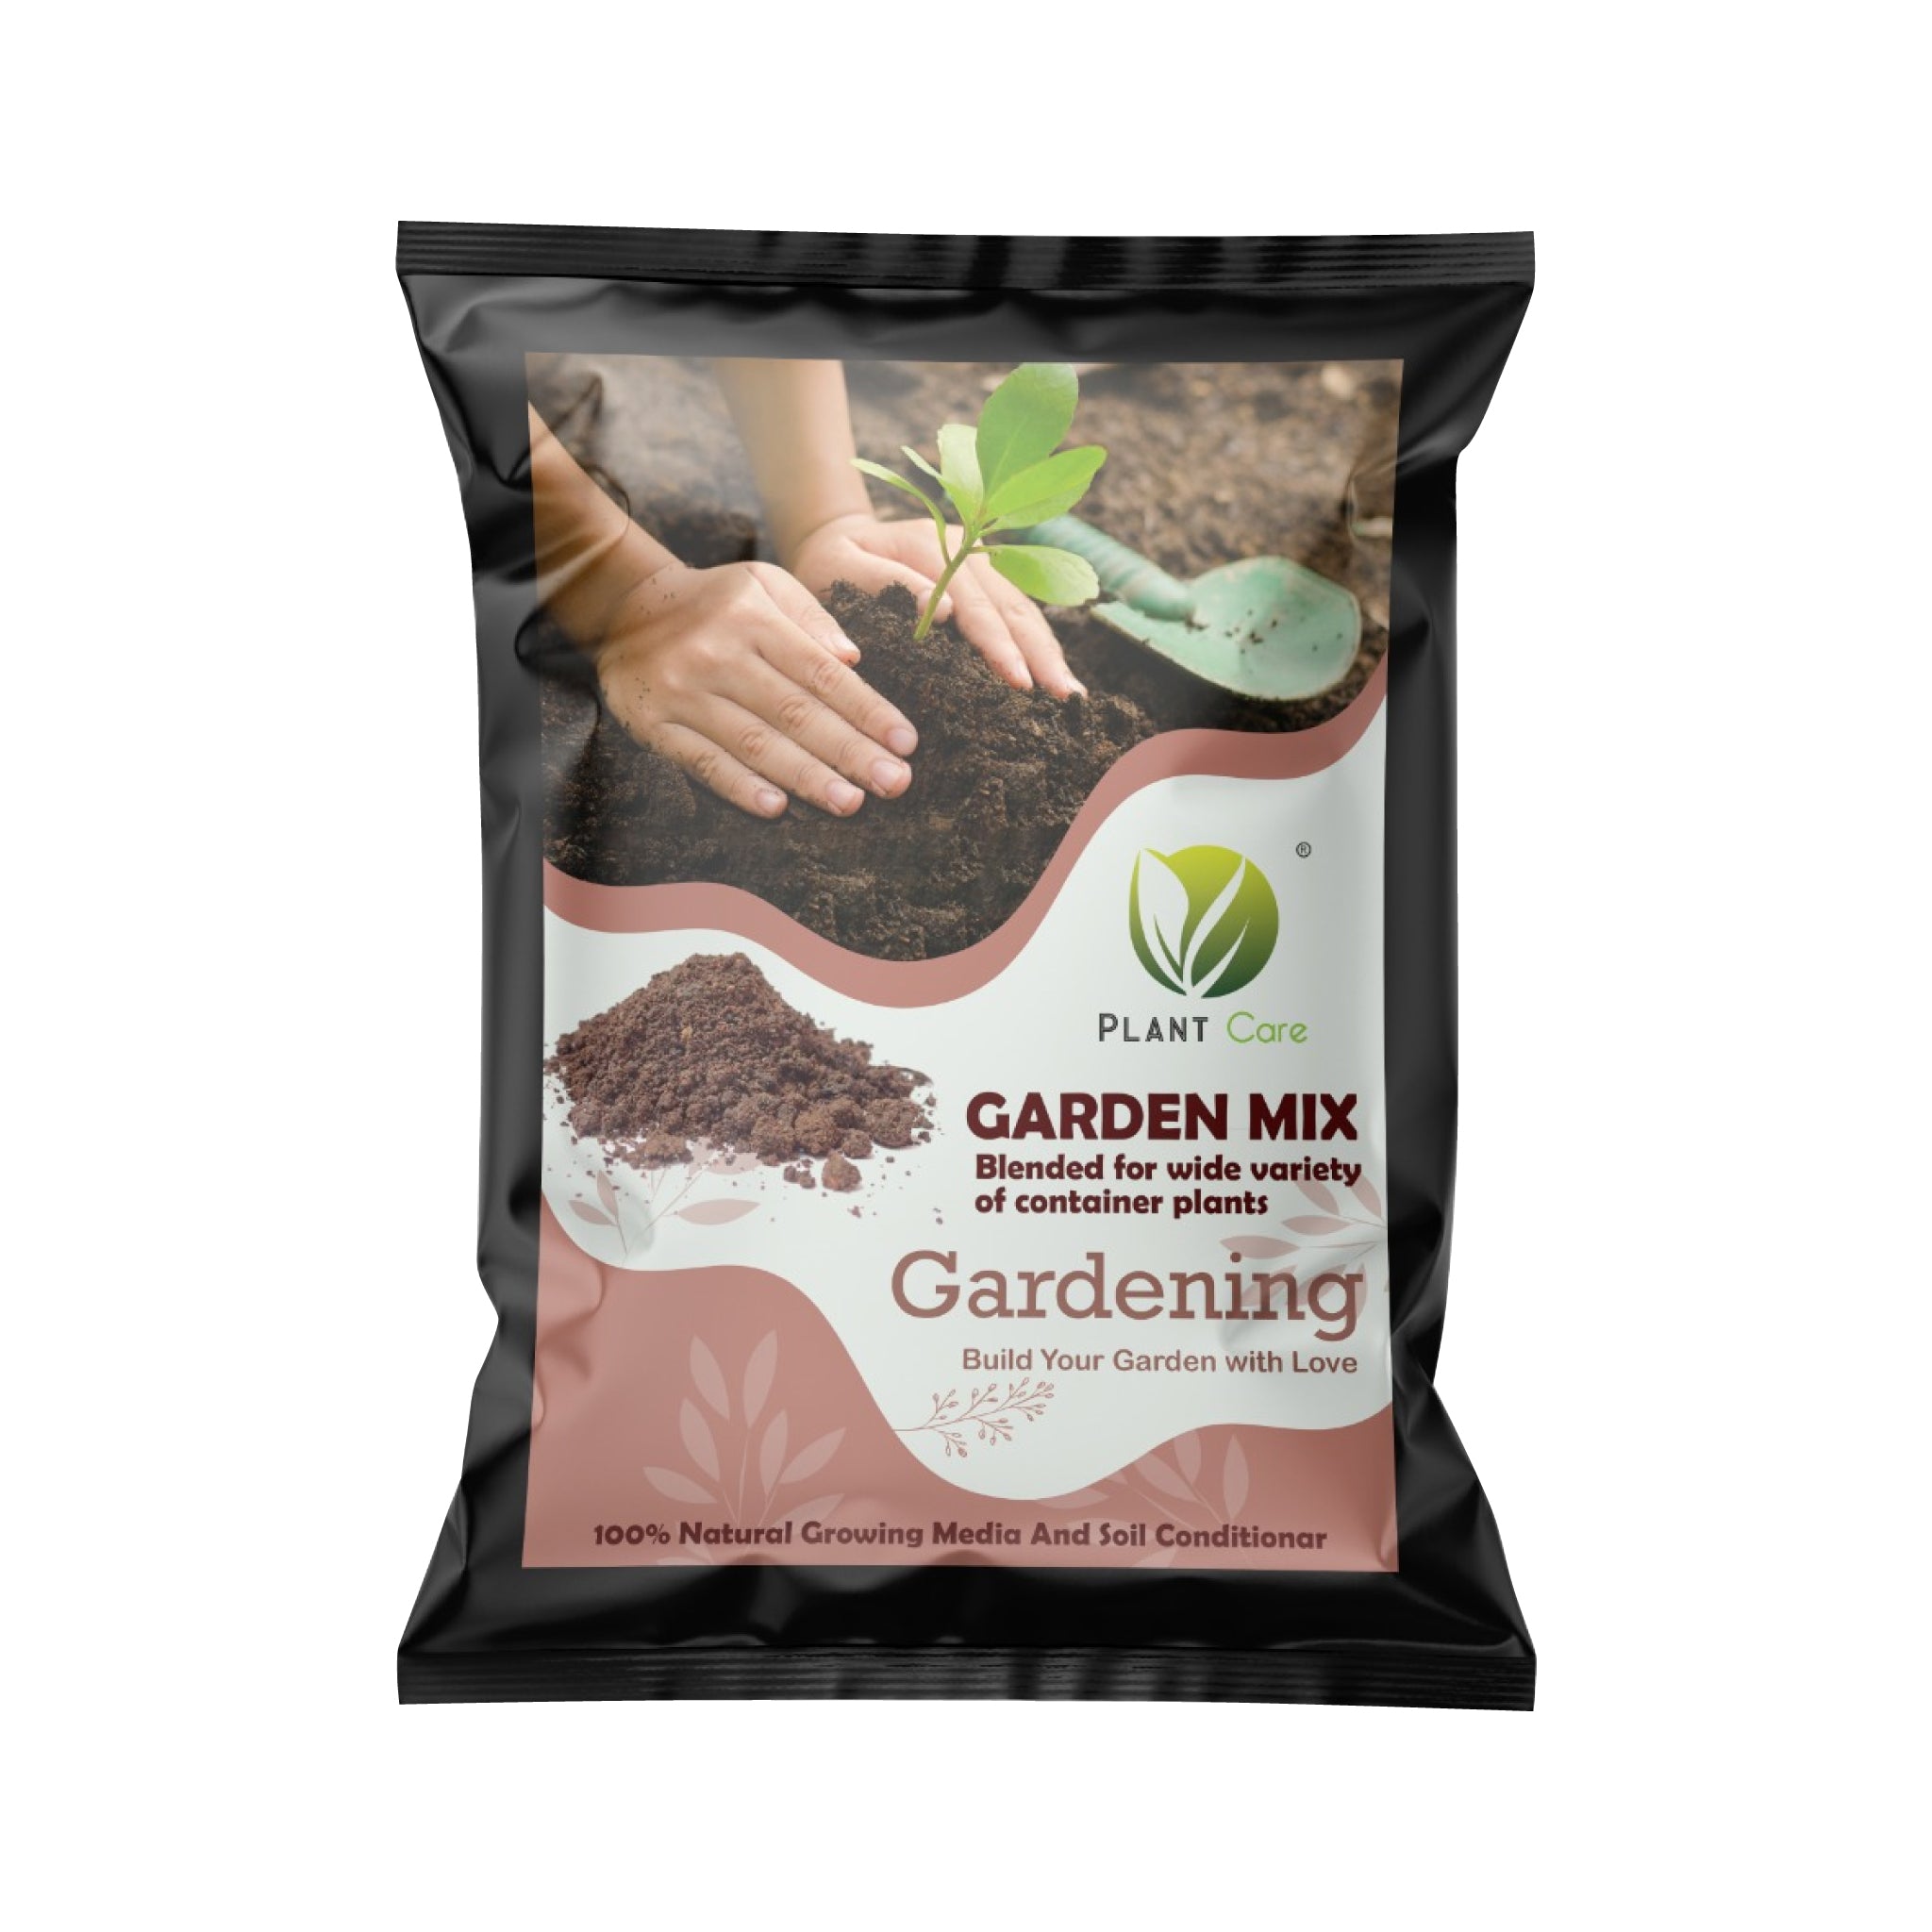 Grow healthy plants with our garden mix